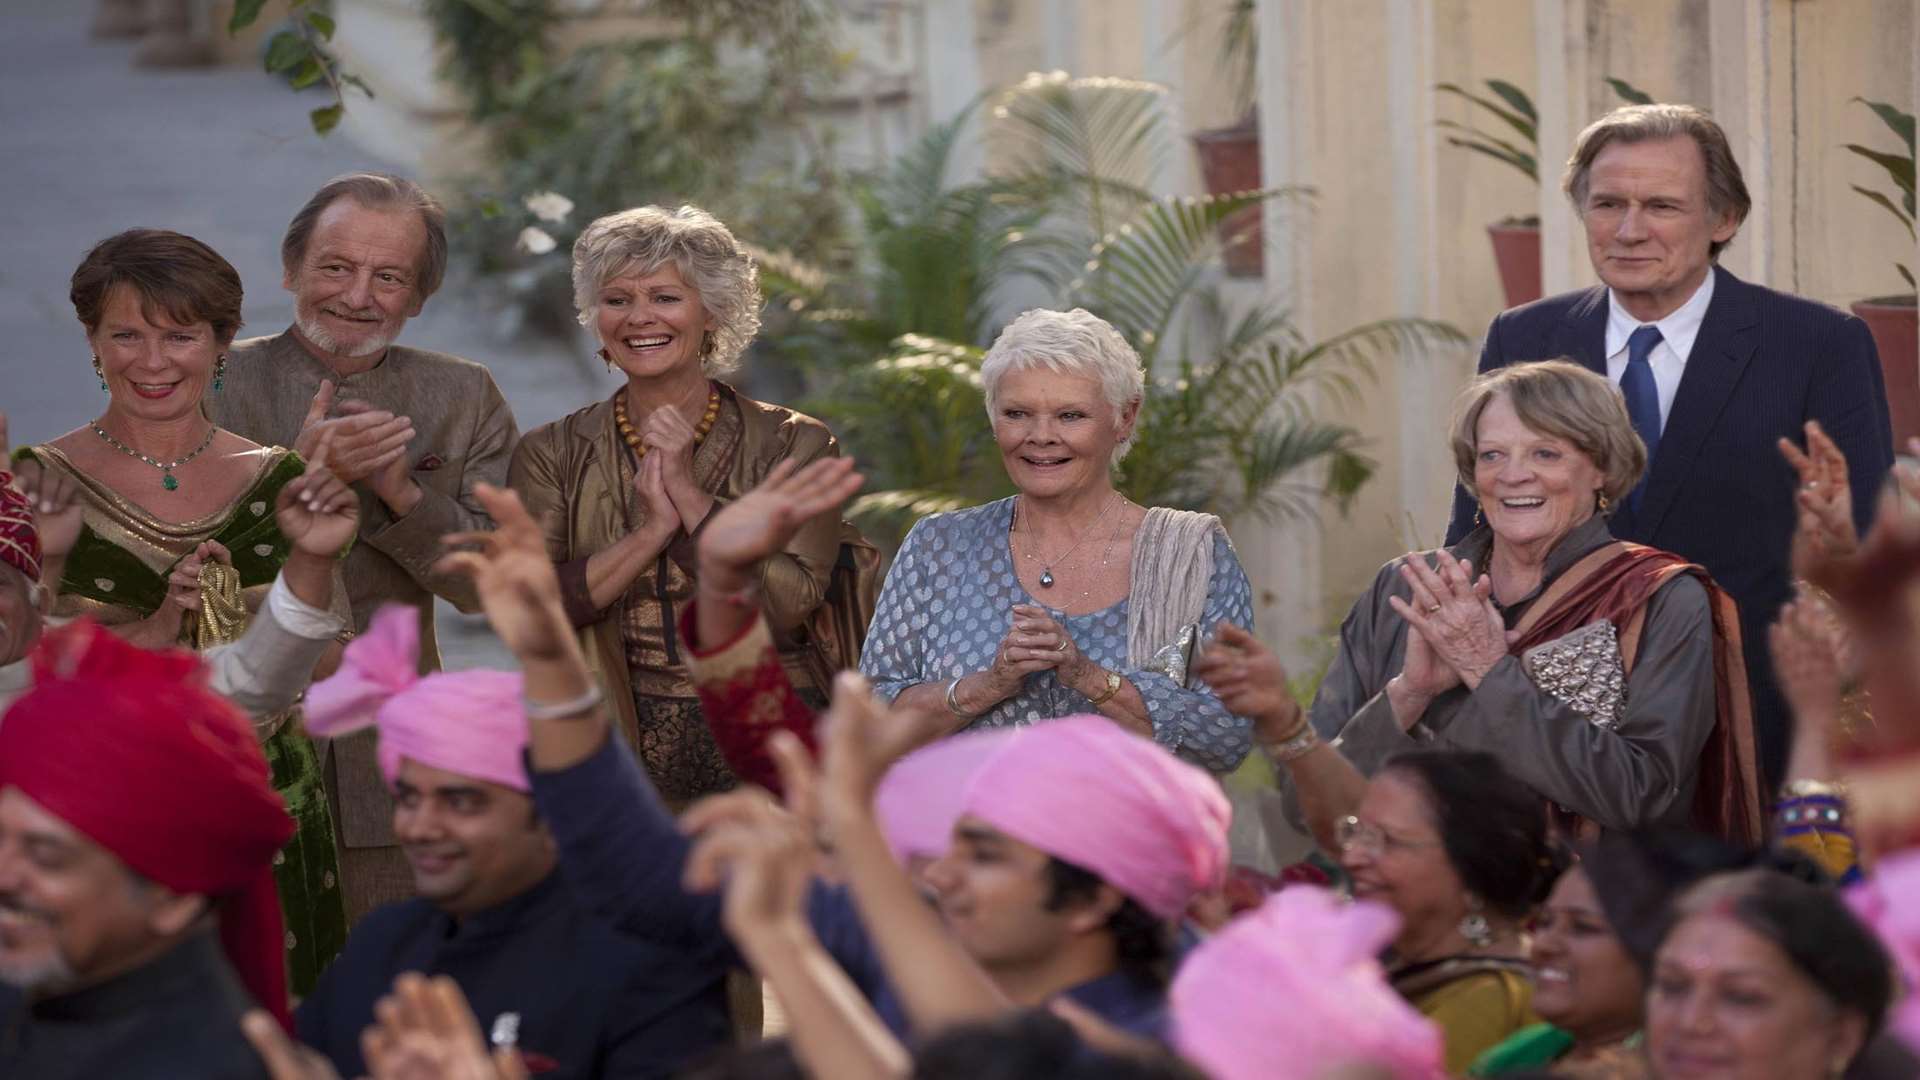 The Second Best Exotic Marigold Hotel (l to r): Celia Imrie as Madge Hardcastle, Ronald Pickup as Norman Cousins, Diana Hardcastle as Carol, Judi Dench as Evelyn Greenslade, Maggie Smith as Muriel Donnely and Bill Nighy as Douglas Ainslie. Picture: PA Photo/Laurie Sparham/Twentieth Century Fox